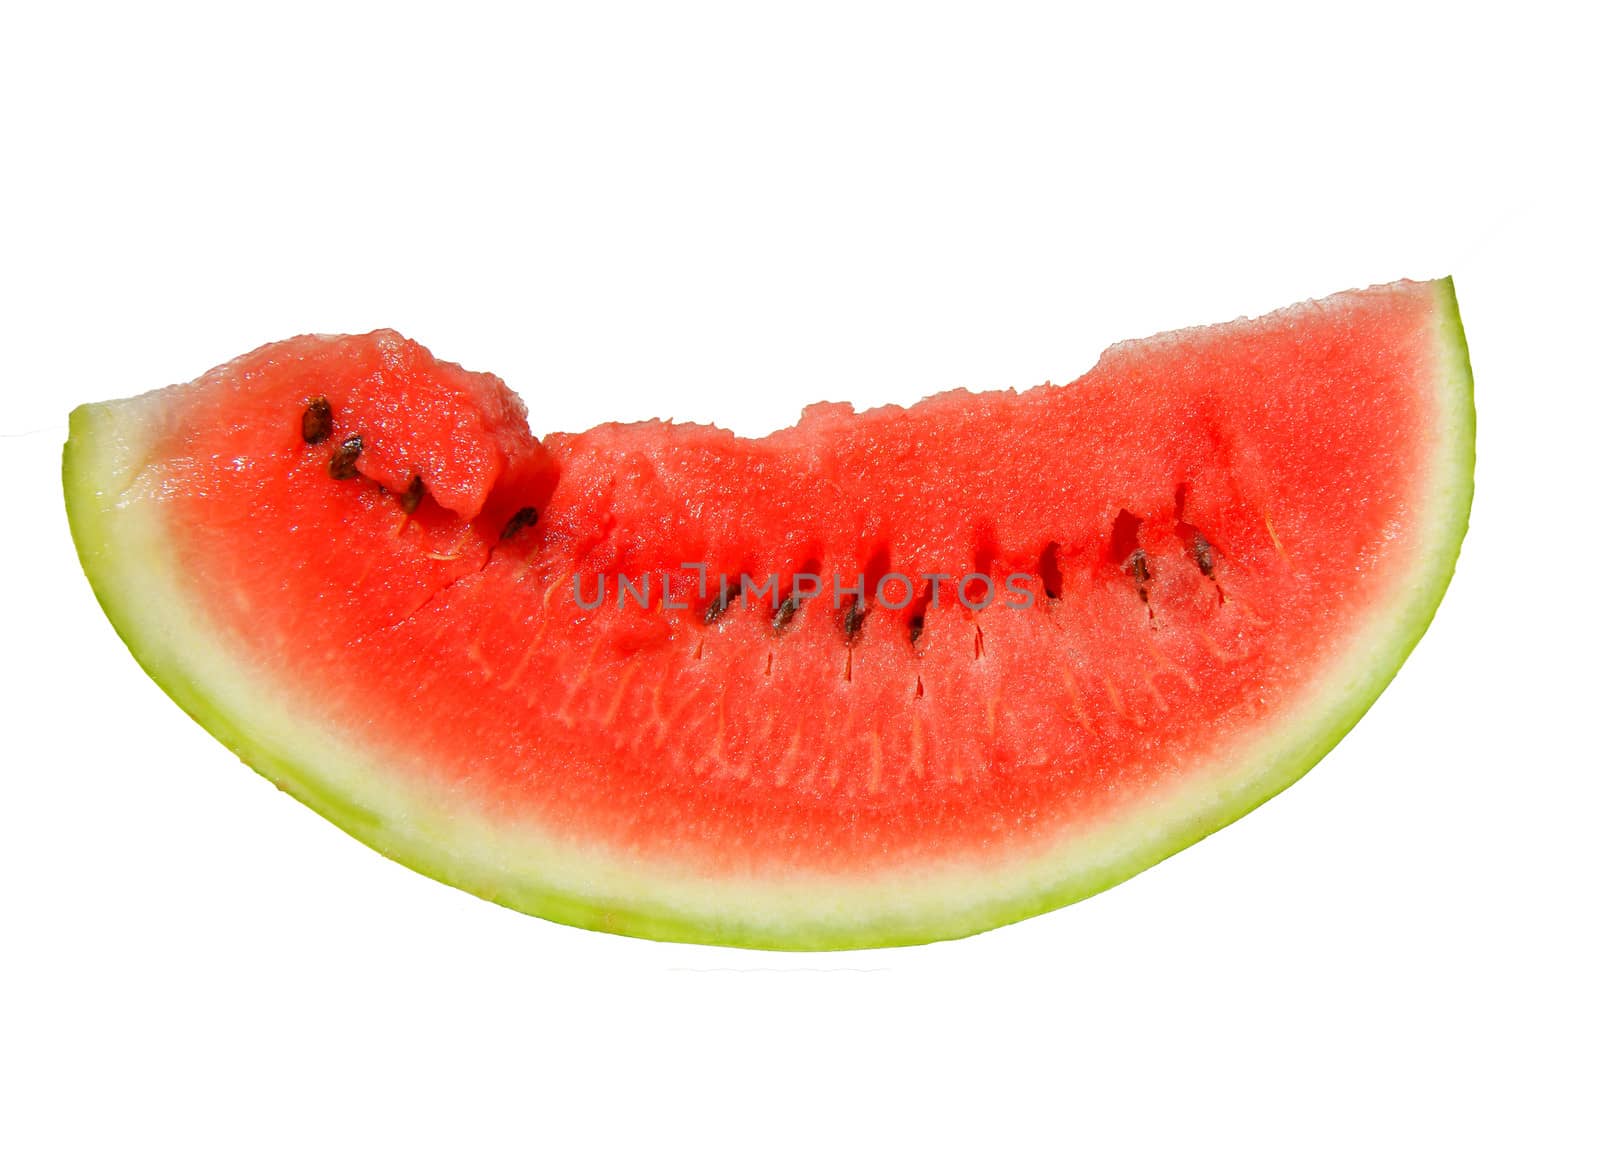 Slice of watermelon on white background by cobol1964